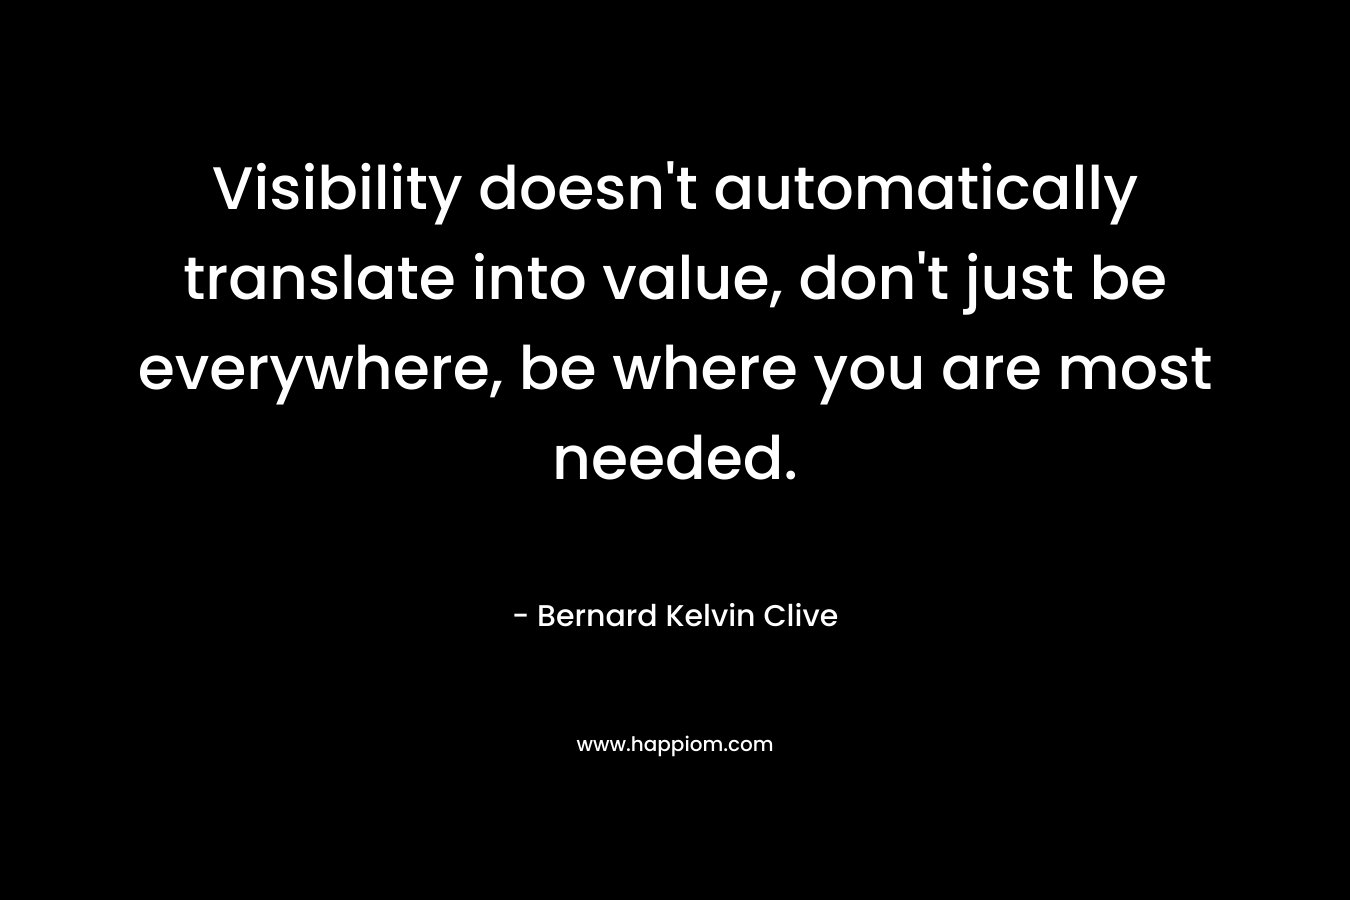 Visibility doesn't automatically translate into value, don't just be everywhere, be where you are most needed.